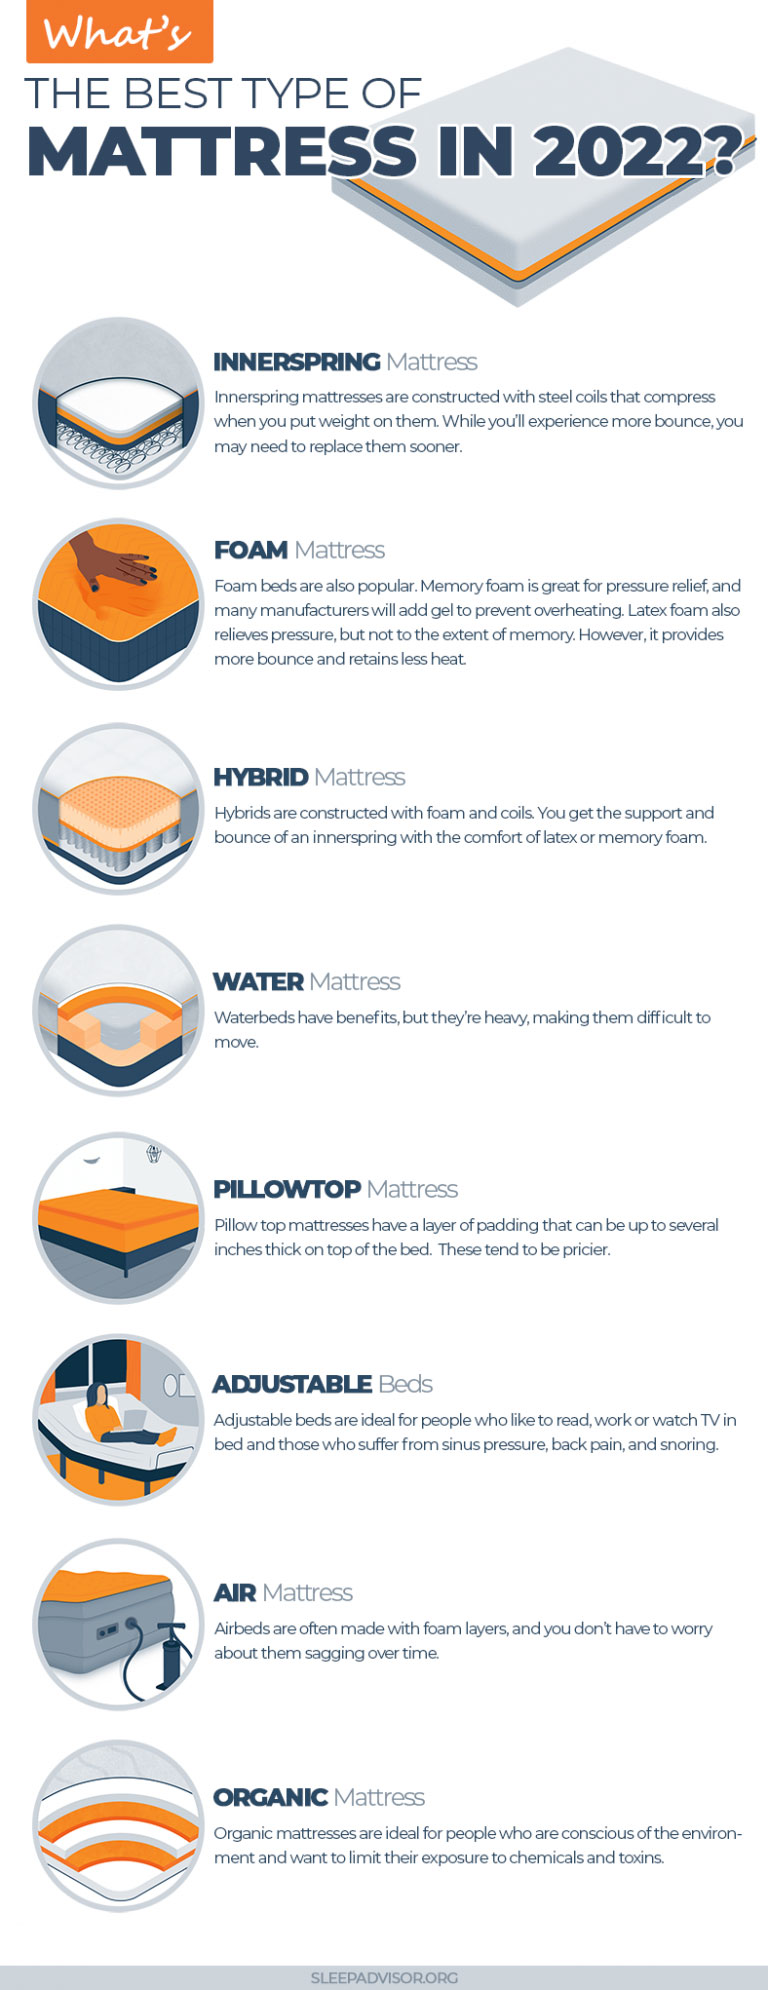 Advantages Of Different Types Of Mattresses